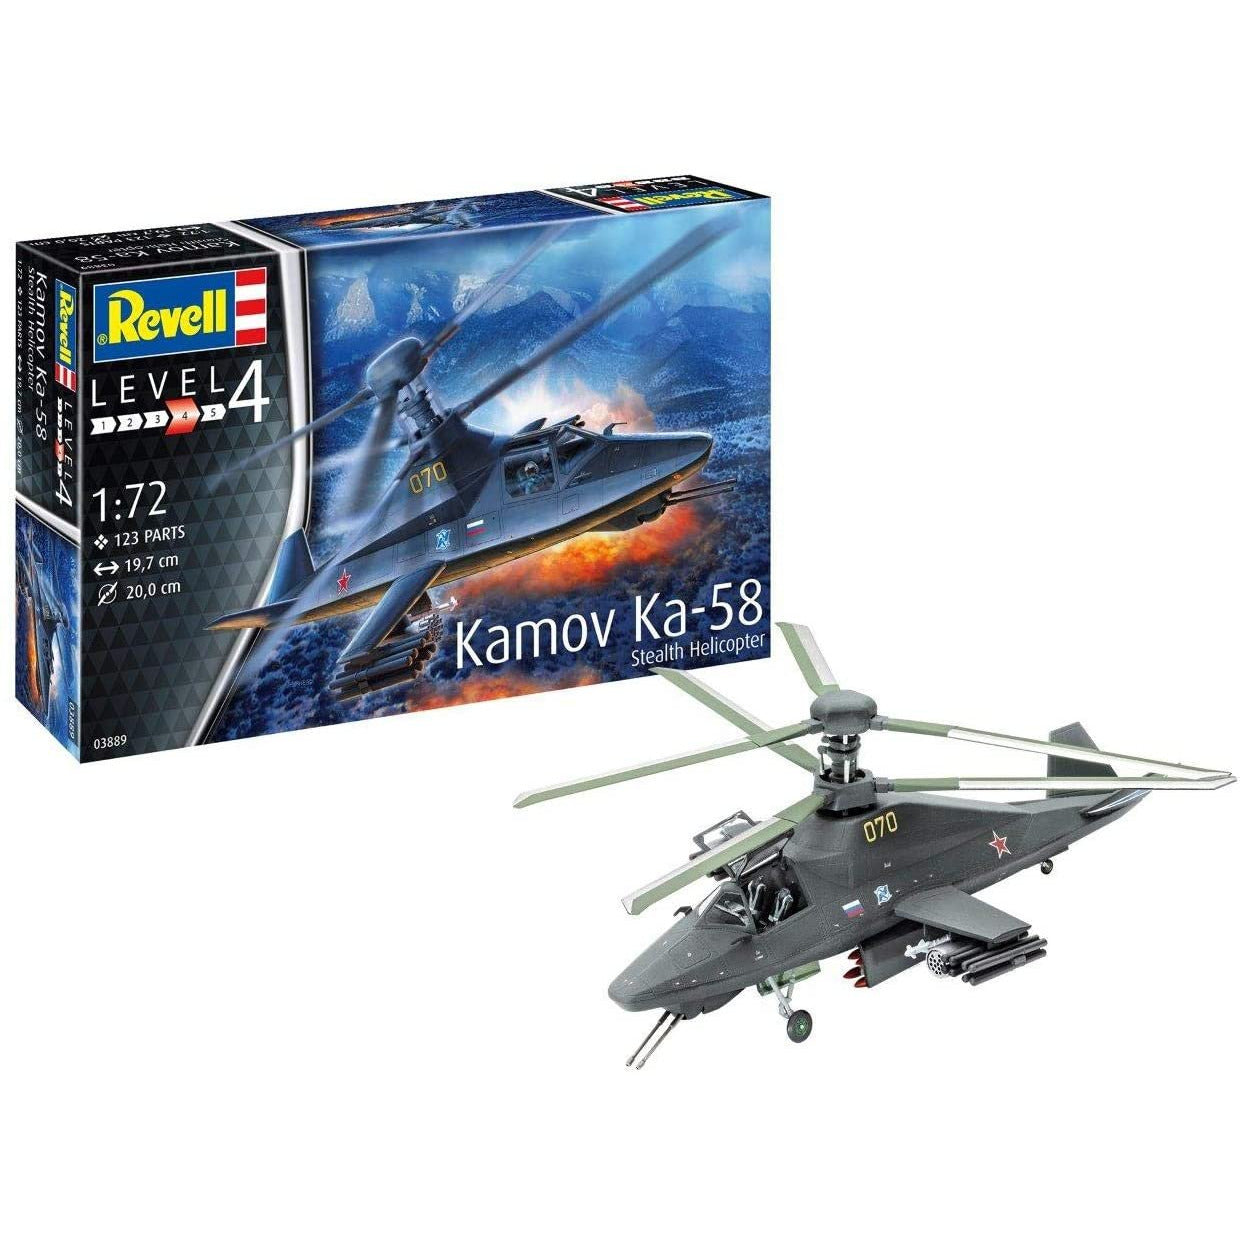 Kamov Ka-58 Stealth Helicopter 1/72 by Revell